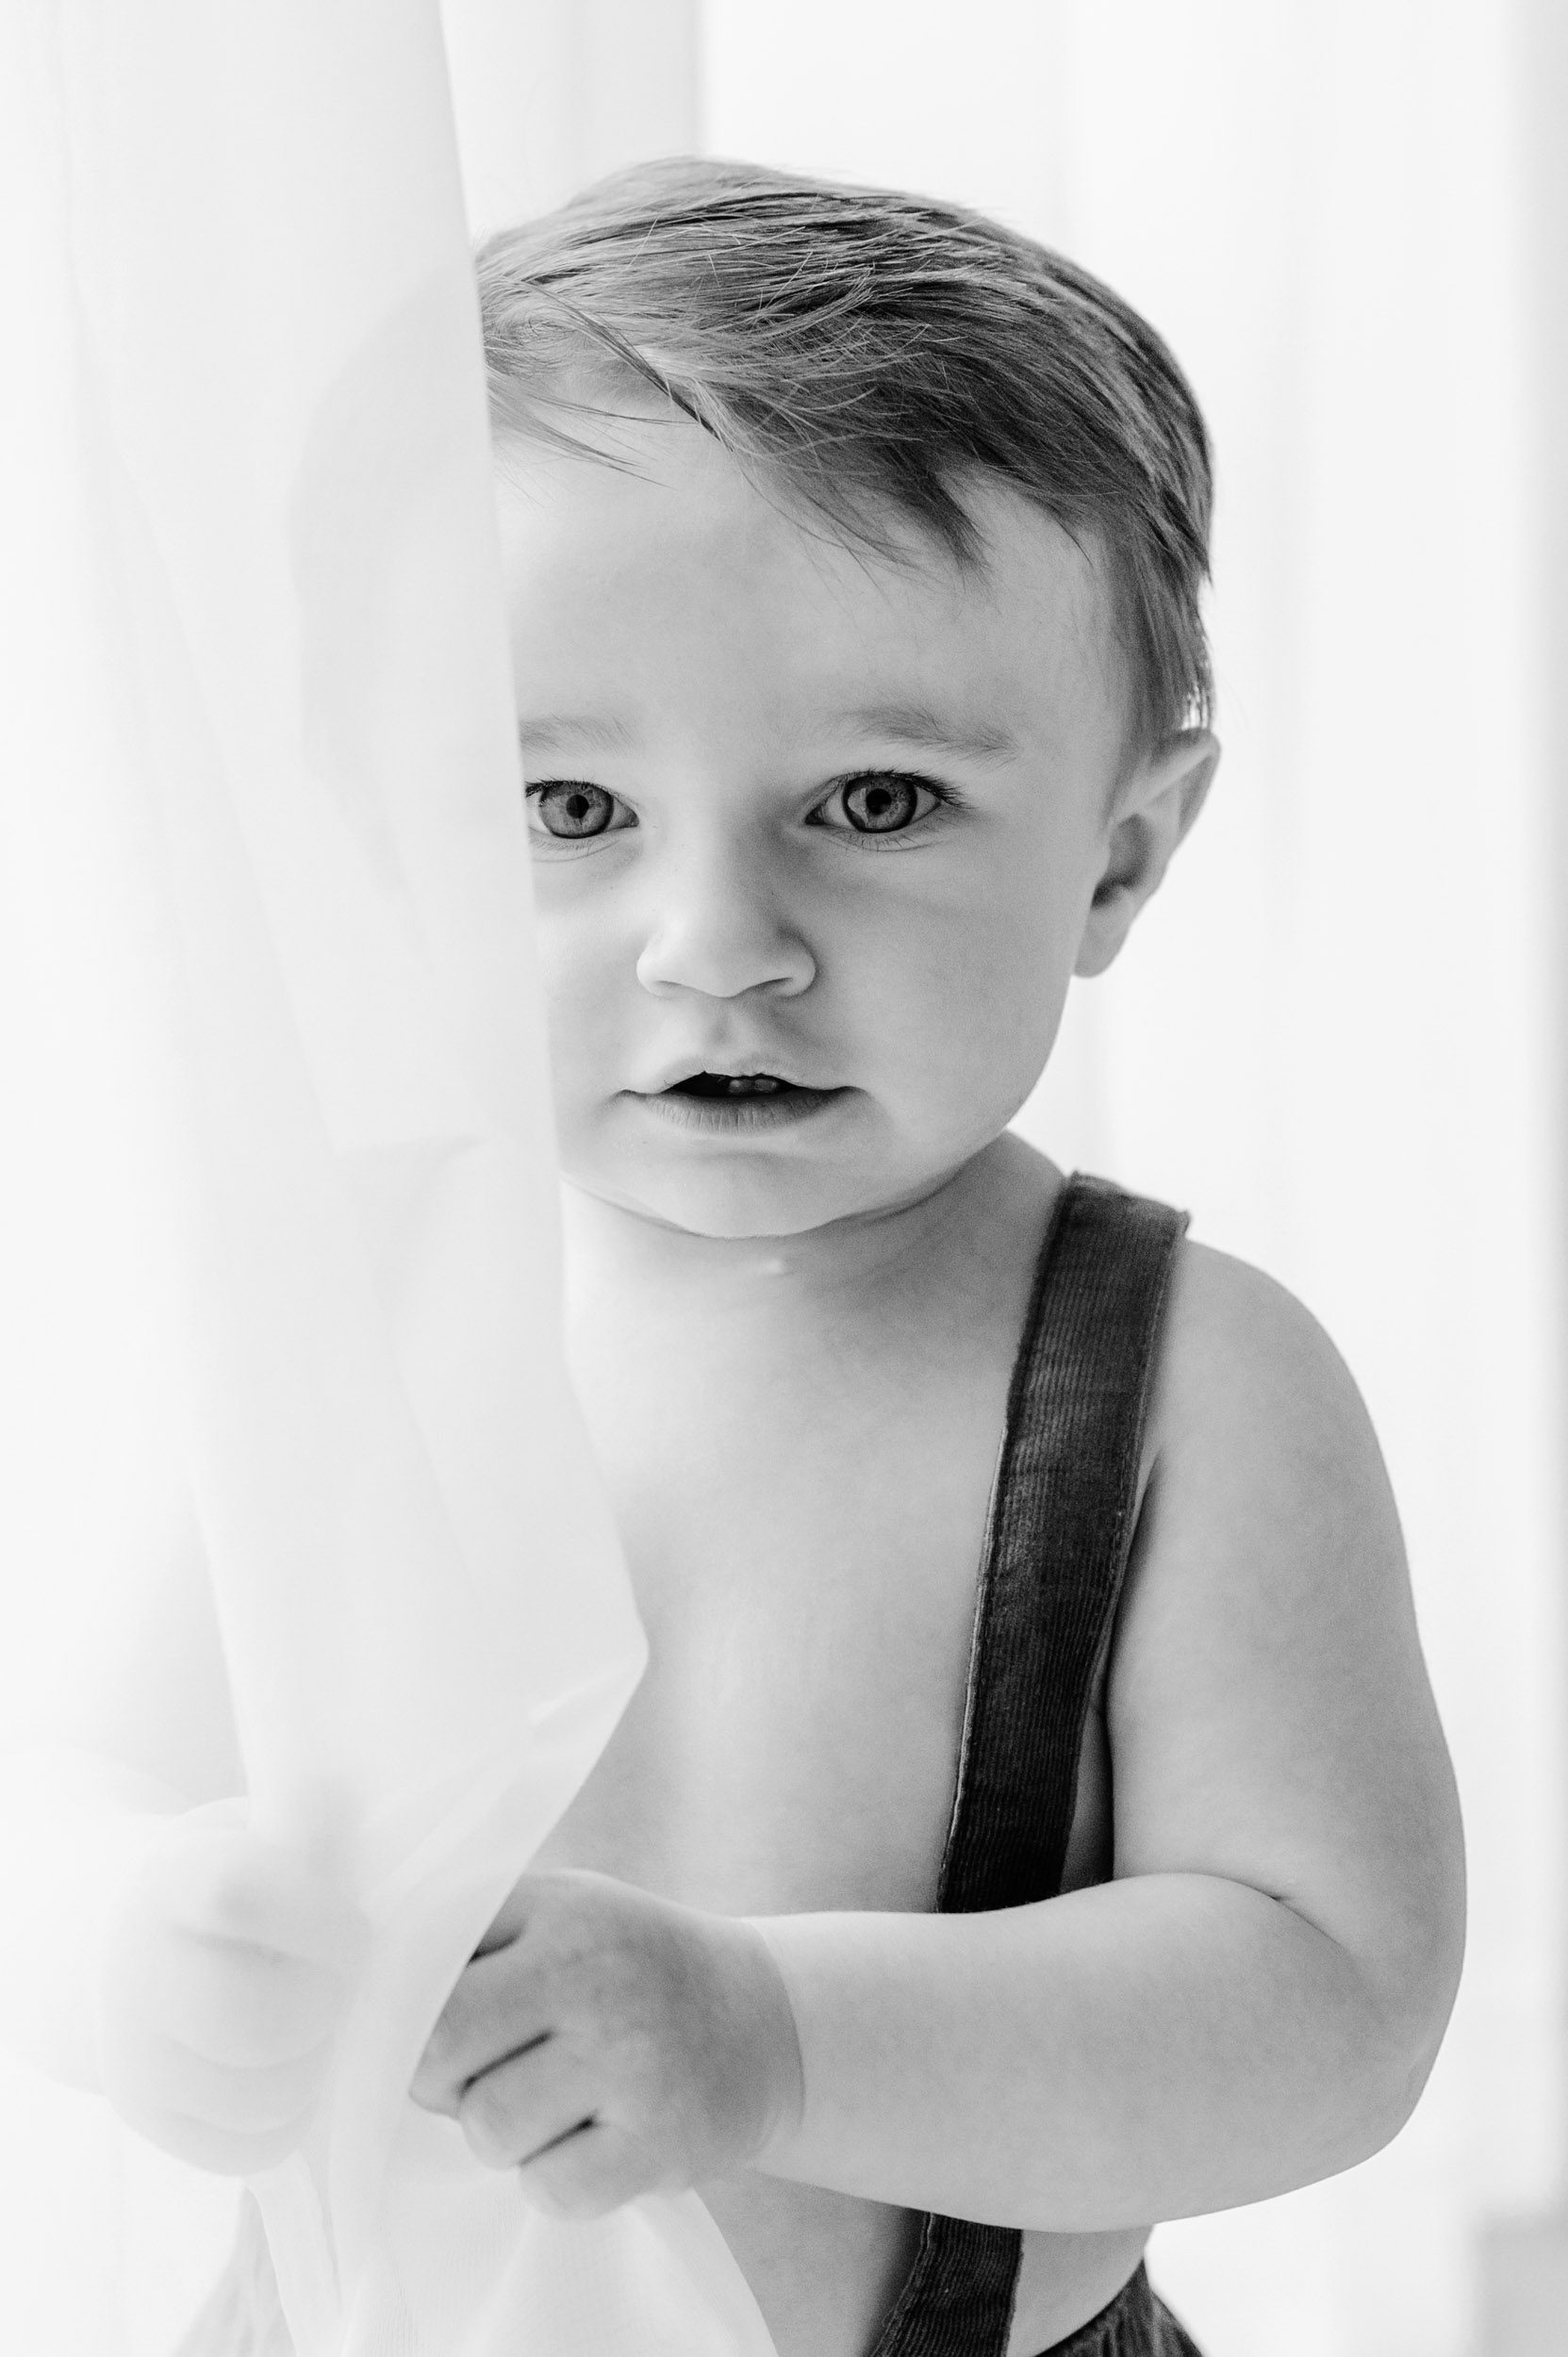 a black and white picture of a young boy holding a sheer curtain in his hand and peeking out from behind it looking directly at the camera during a toddler milestone photoshoot